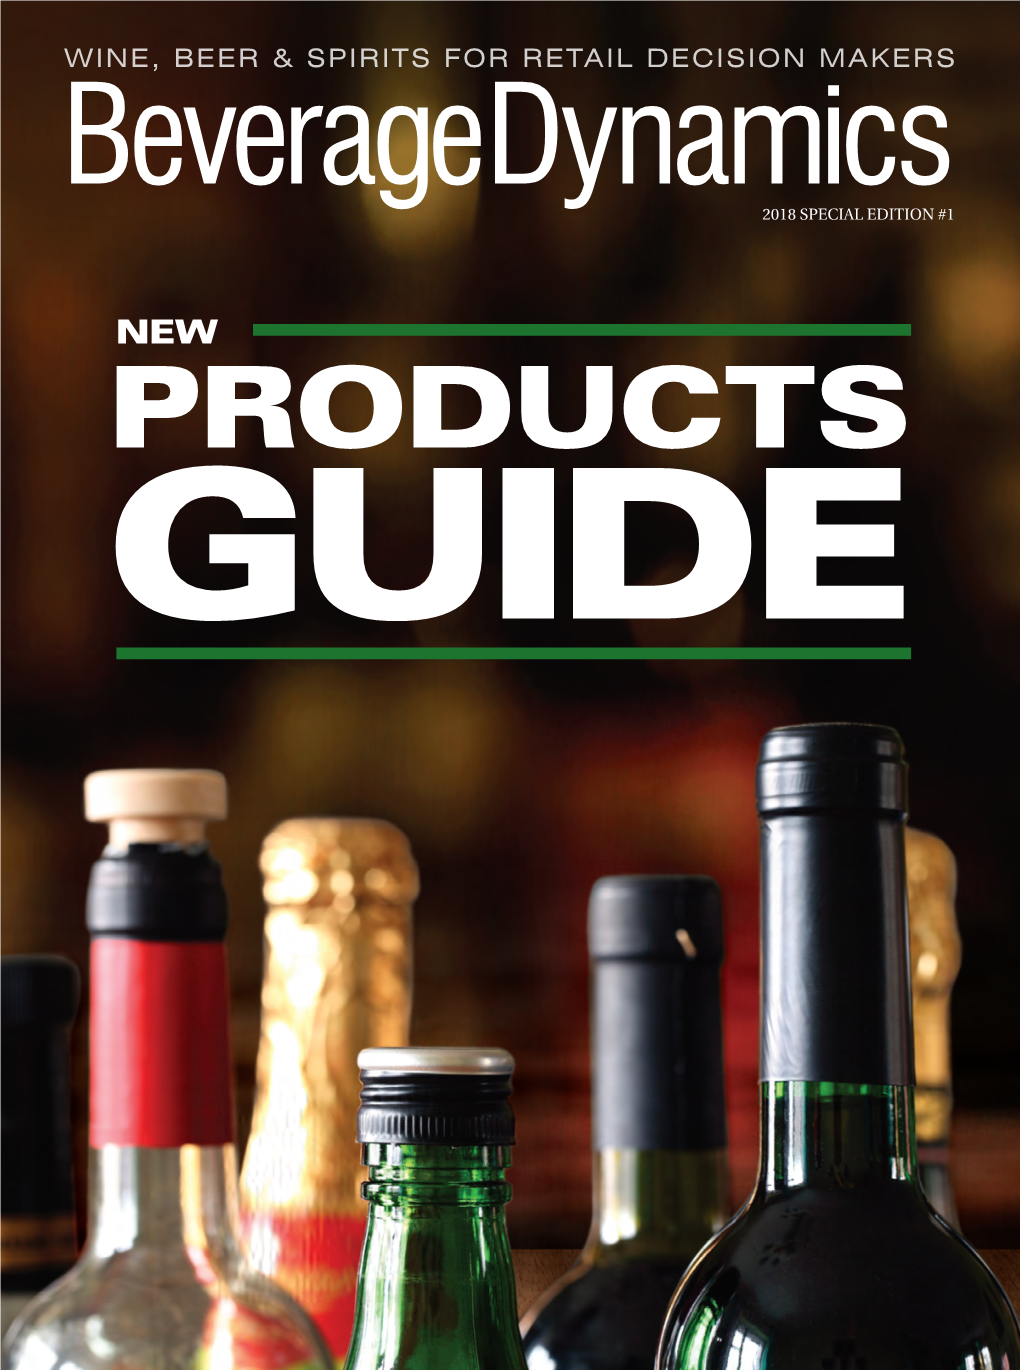 PRODUCTS GUIDE Editor’S NOTE